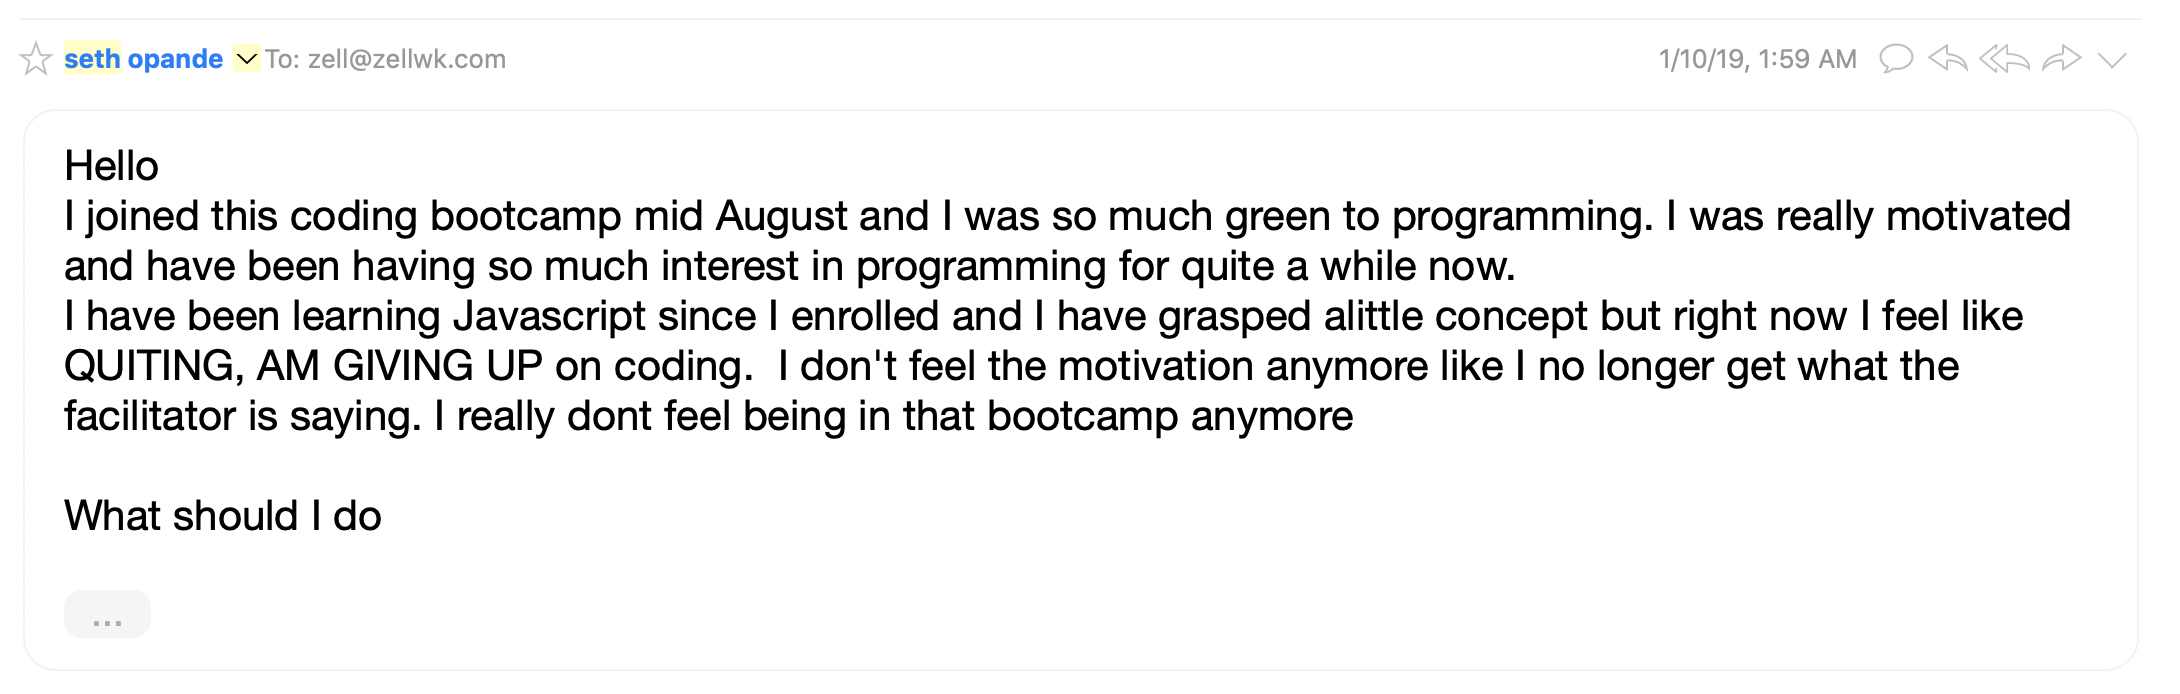 Email says: I joined this coding bootcamp mid August and I was so much green to programming. I was really motivated and have been having so much interest in programming for quite a while now. I have been learning Javascript since I enrolled and I have grasped a little concept but right now I feel like QUITING, AM GIVING UP on coding. I don't feel the motivation anymore like I no longer get what the facilitator is saying. I really dont feel being in that bootcamp anymore. 